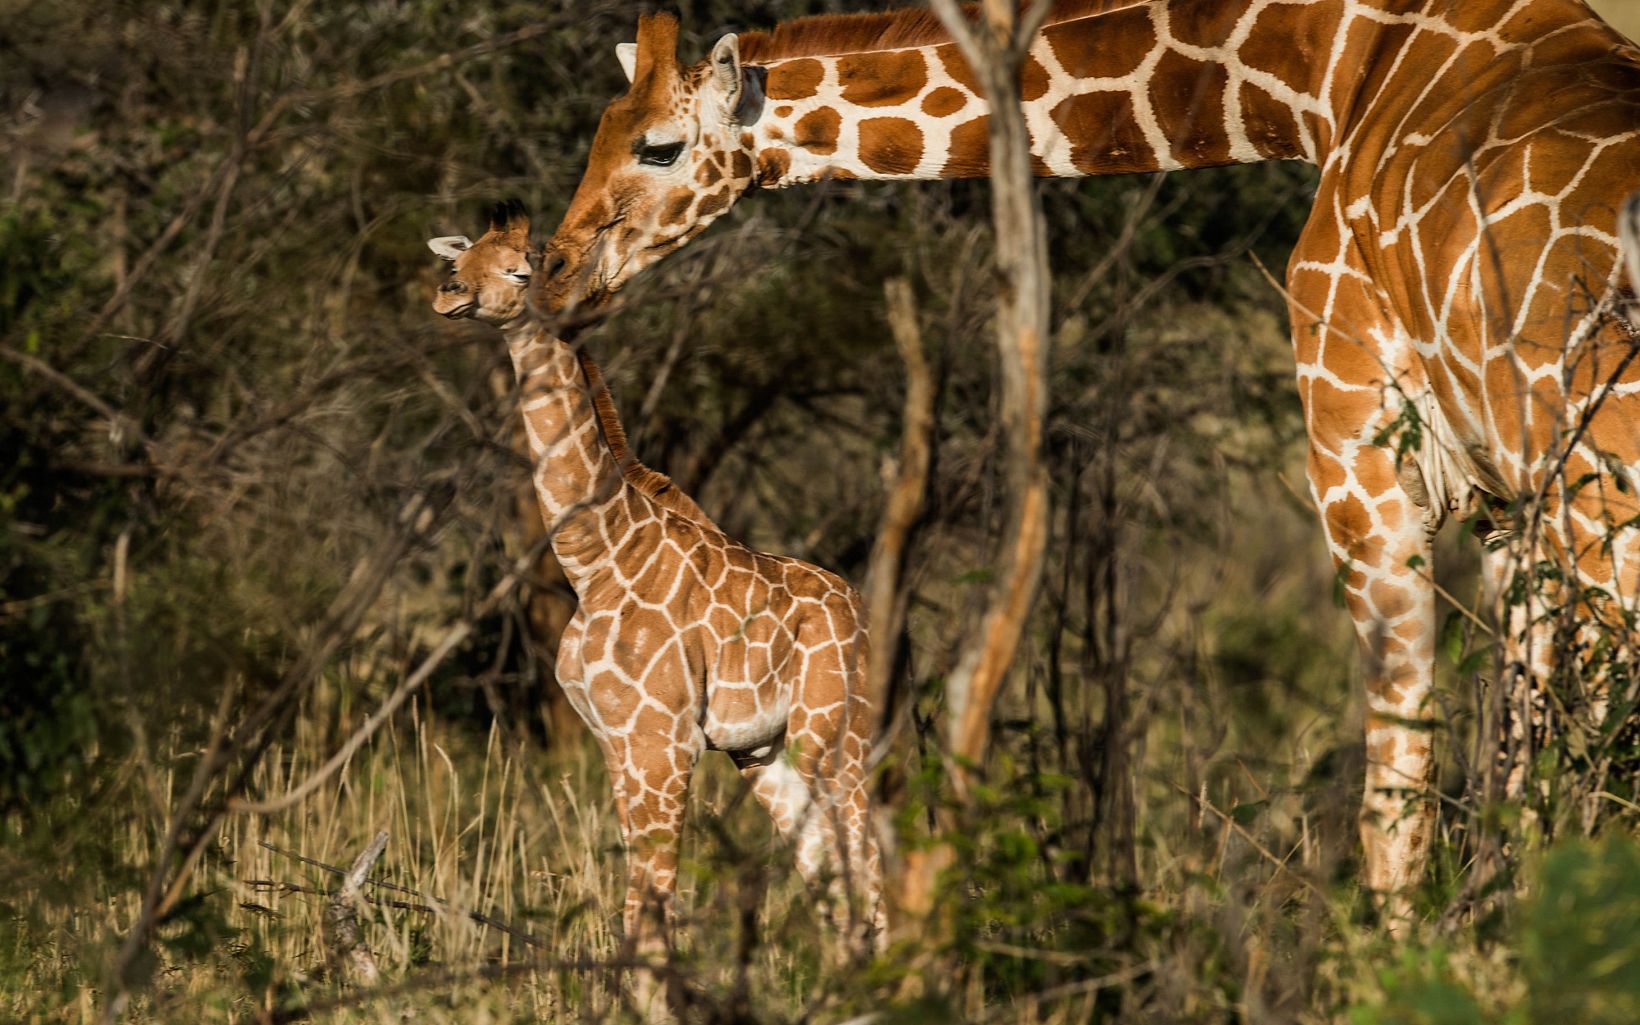 Current estimates are that giraffe populations across Africa have dropped 40 percent in 25 years, plummeting from 140,000 in the late 1990s to about 85,000 today.